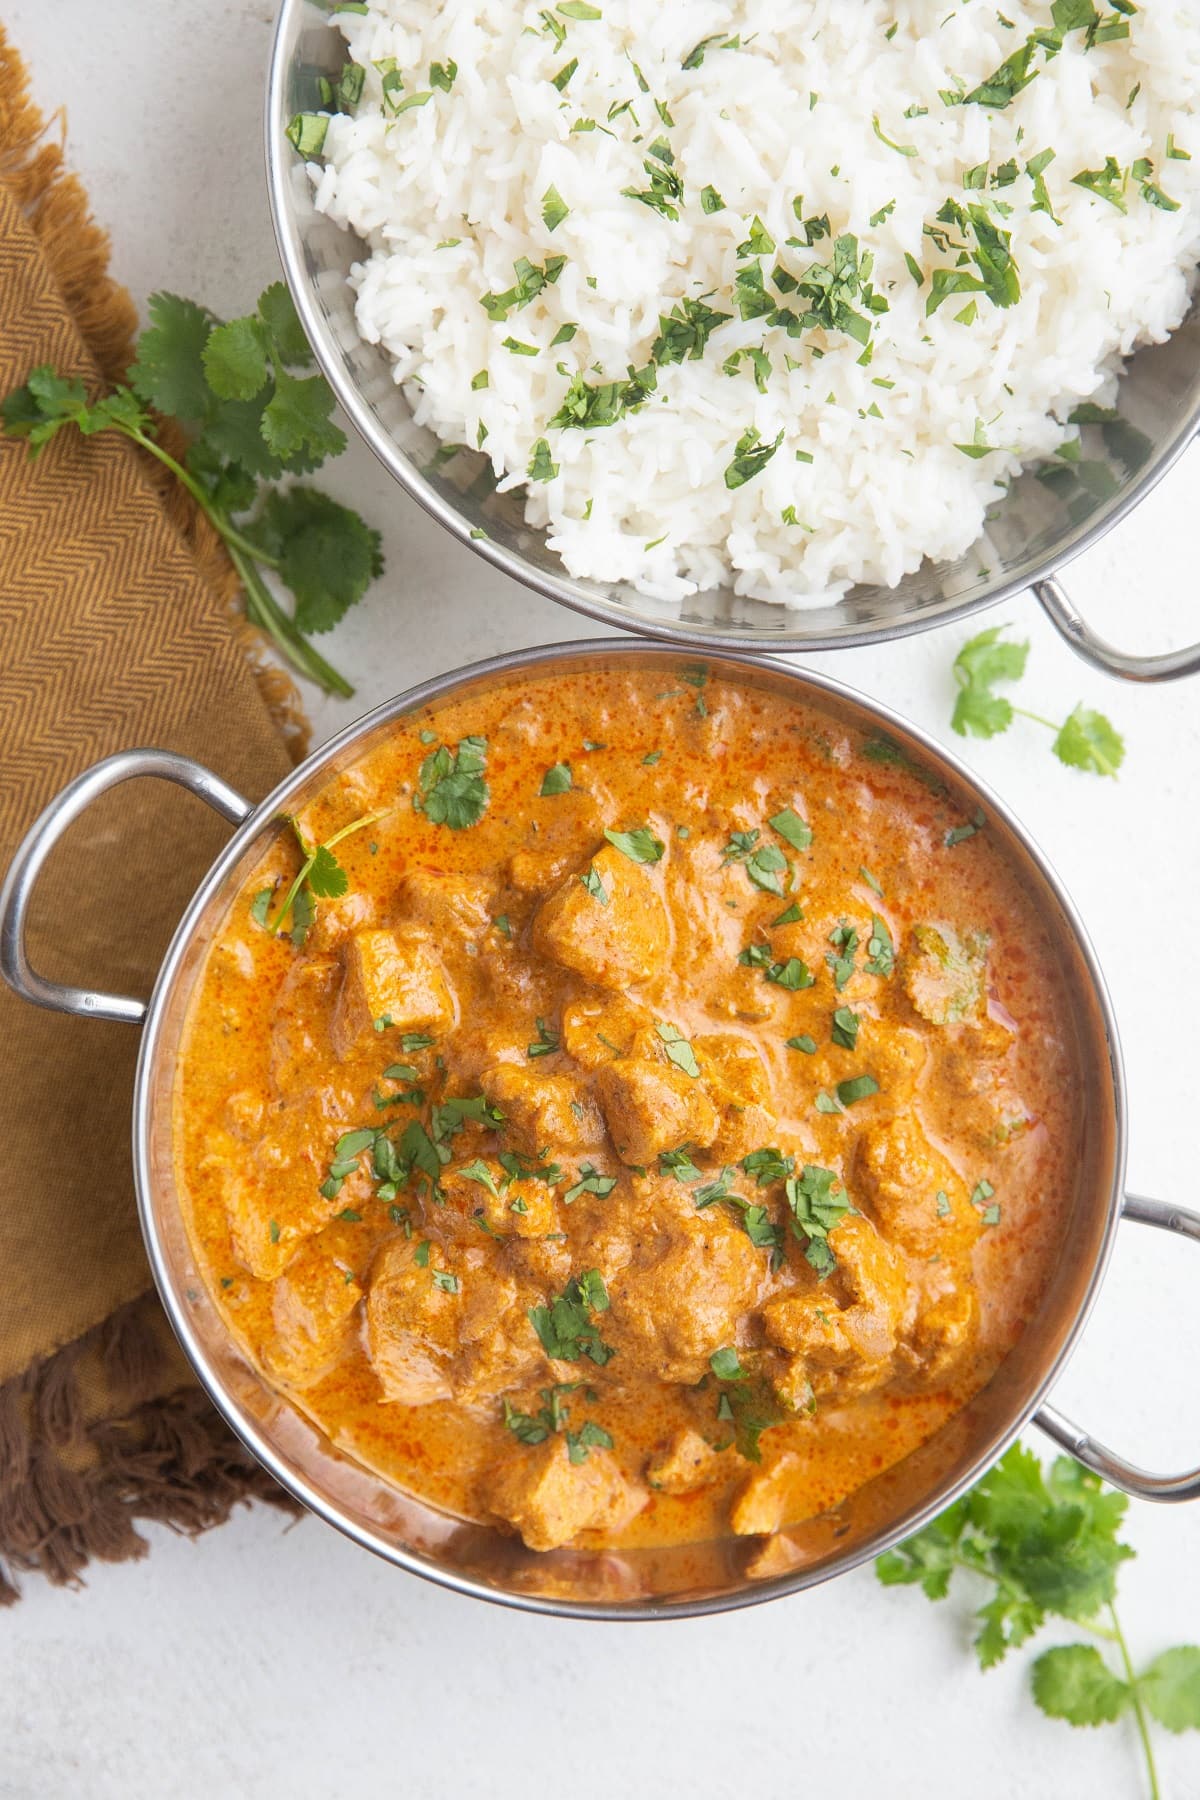 metal Indian dish of chicken tikka masala and a separate dish of steamed white rice. Fresh cilantro all around.